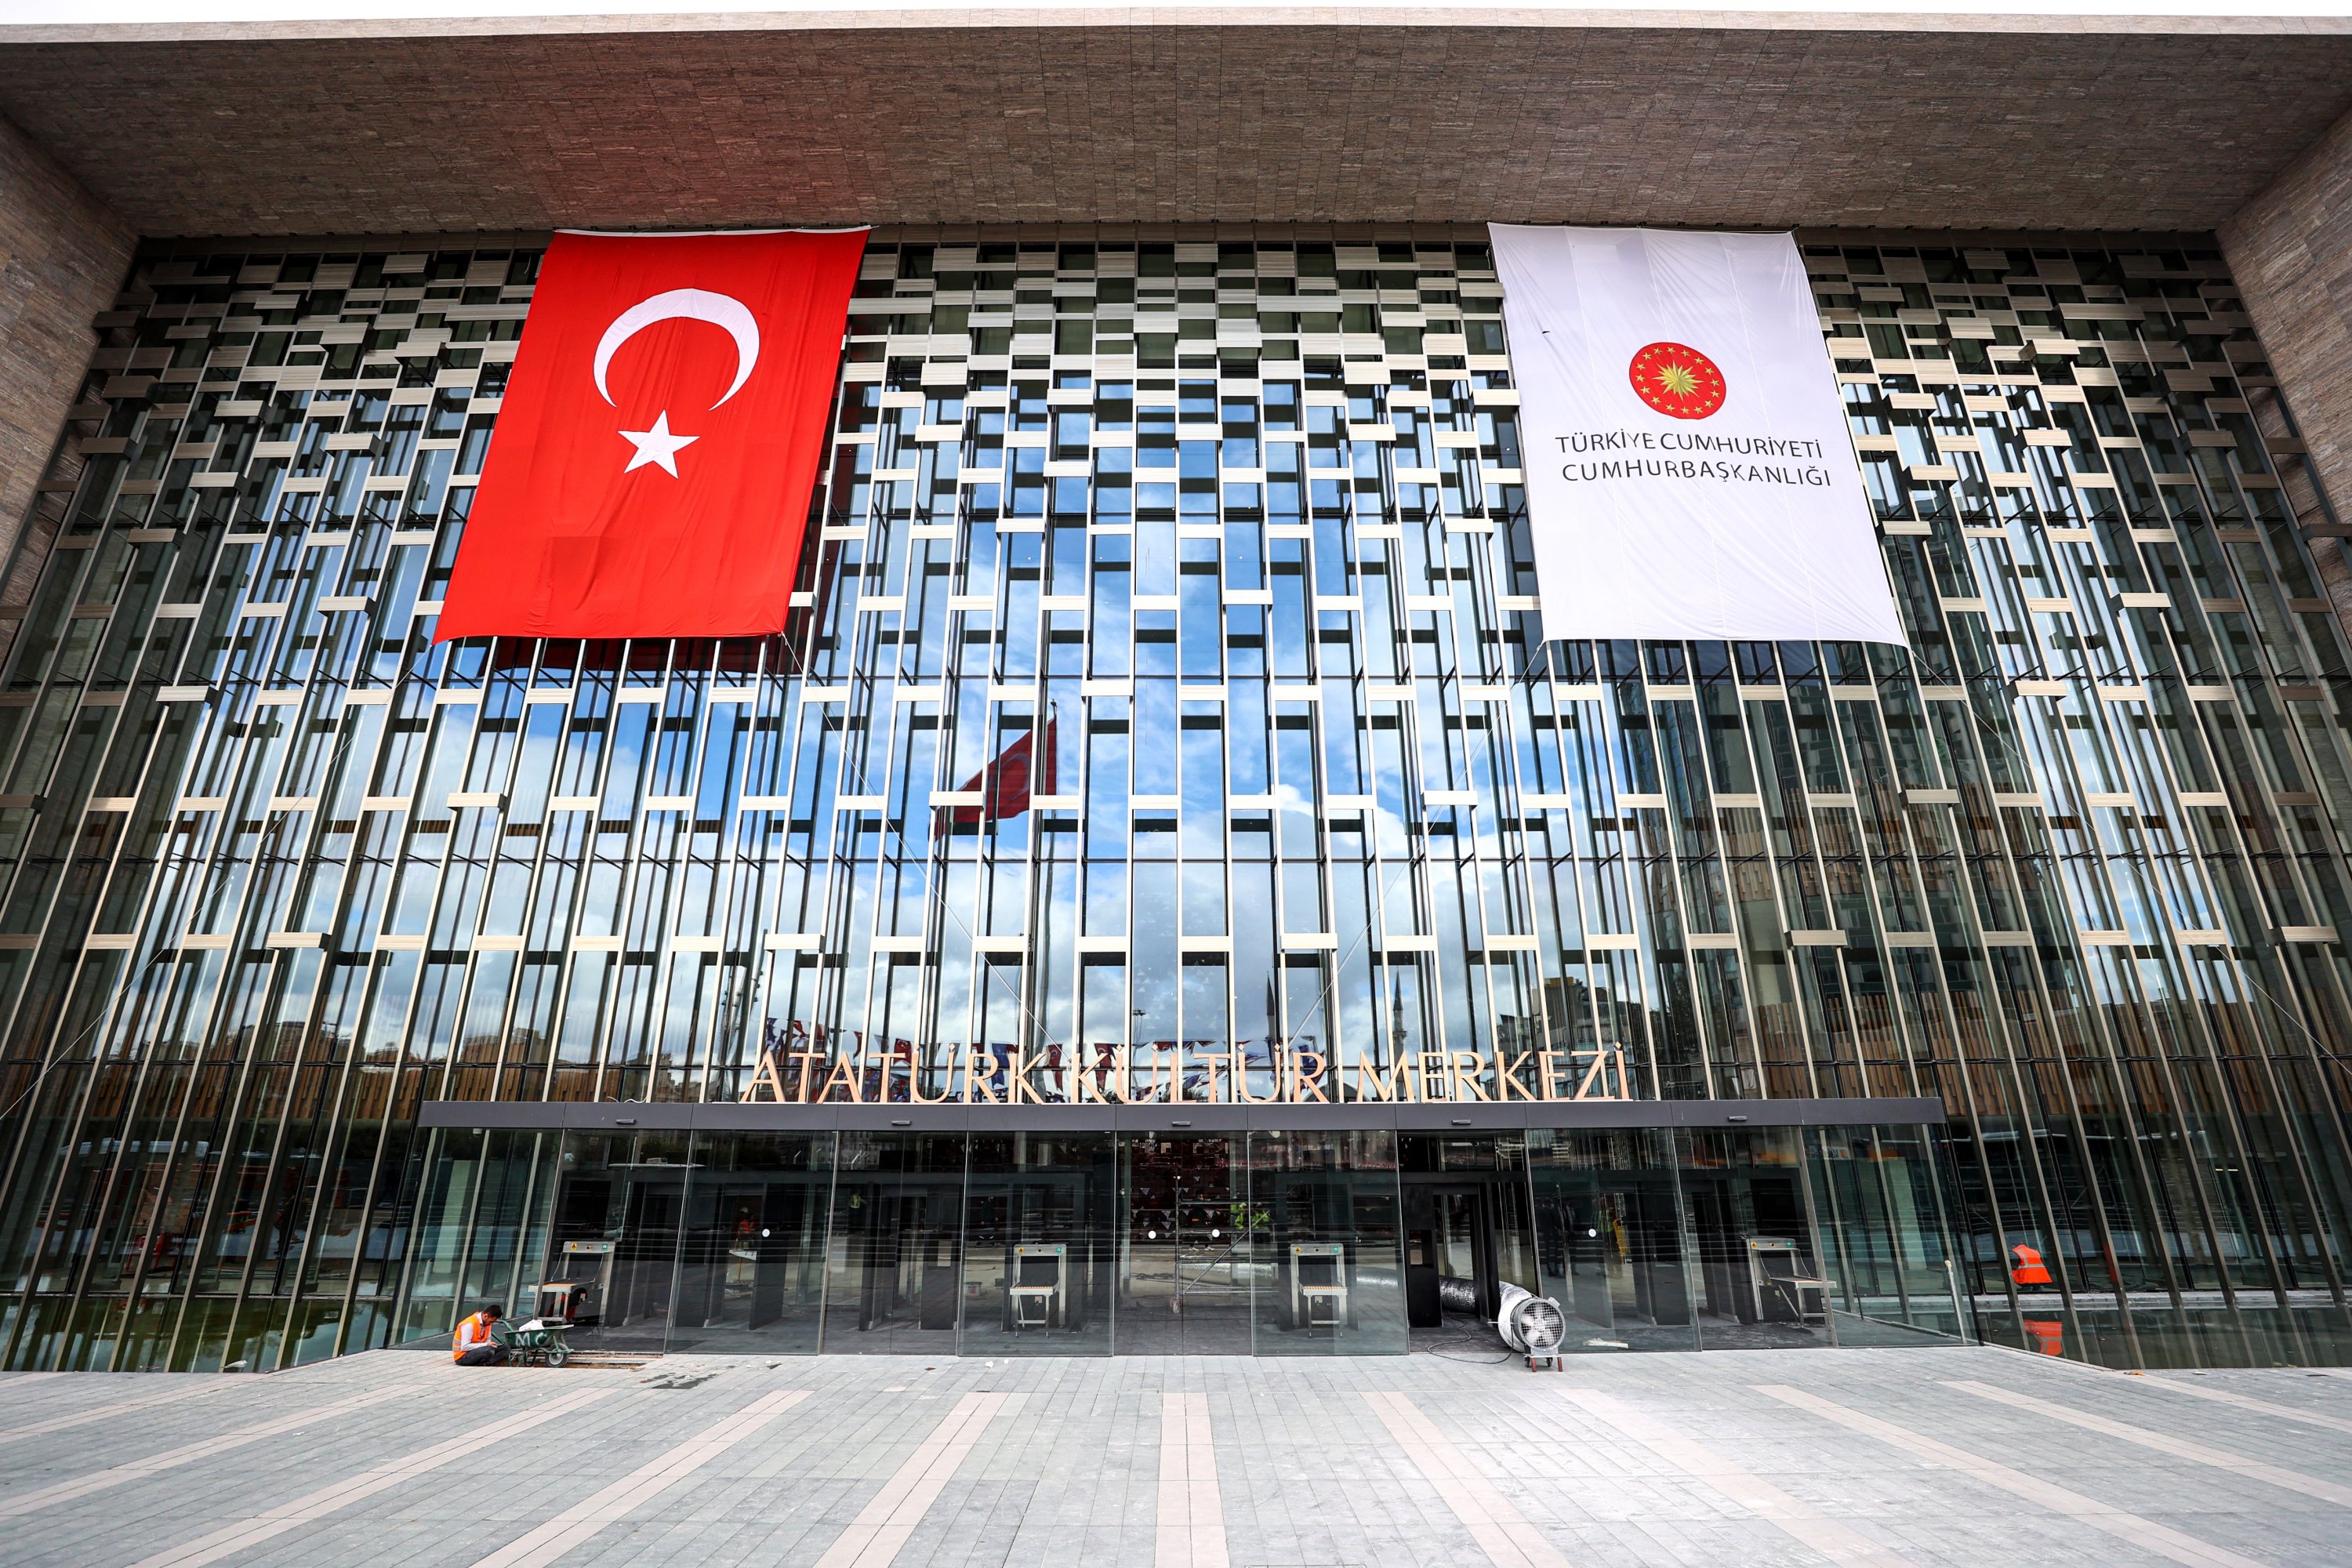 Preparations are ongoing at the Atatürk Cultural Center (AKM), an iconic building resconstructed on Istanbul's Taksim Square, to have the center ready by Oct. 29, Republic Day, in this photo taken on Oct. 1, 2021. (AA Photo)